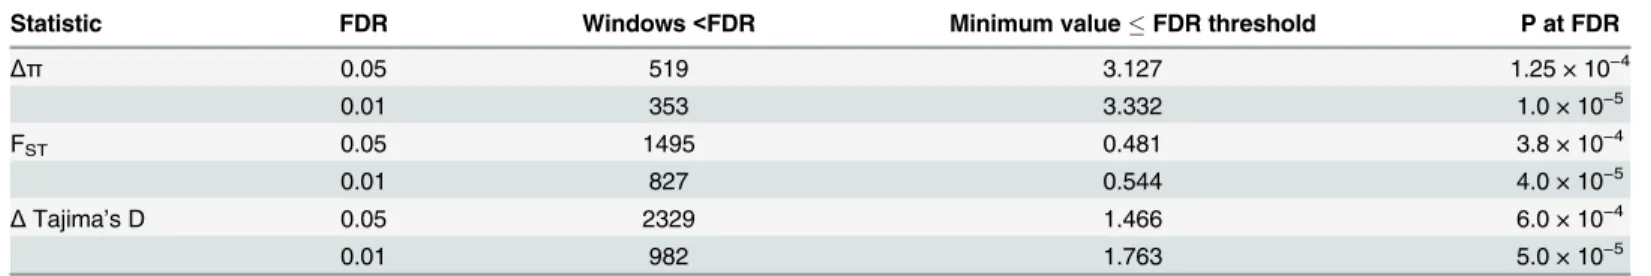 Table 1. FDR threshold values and window counts for selection scan statistics.